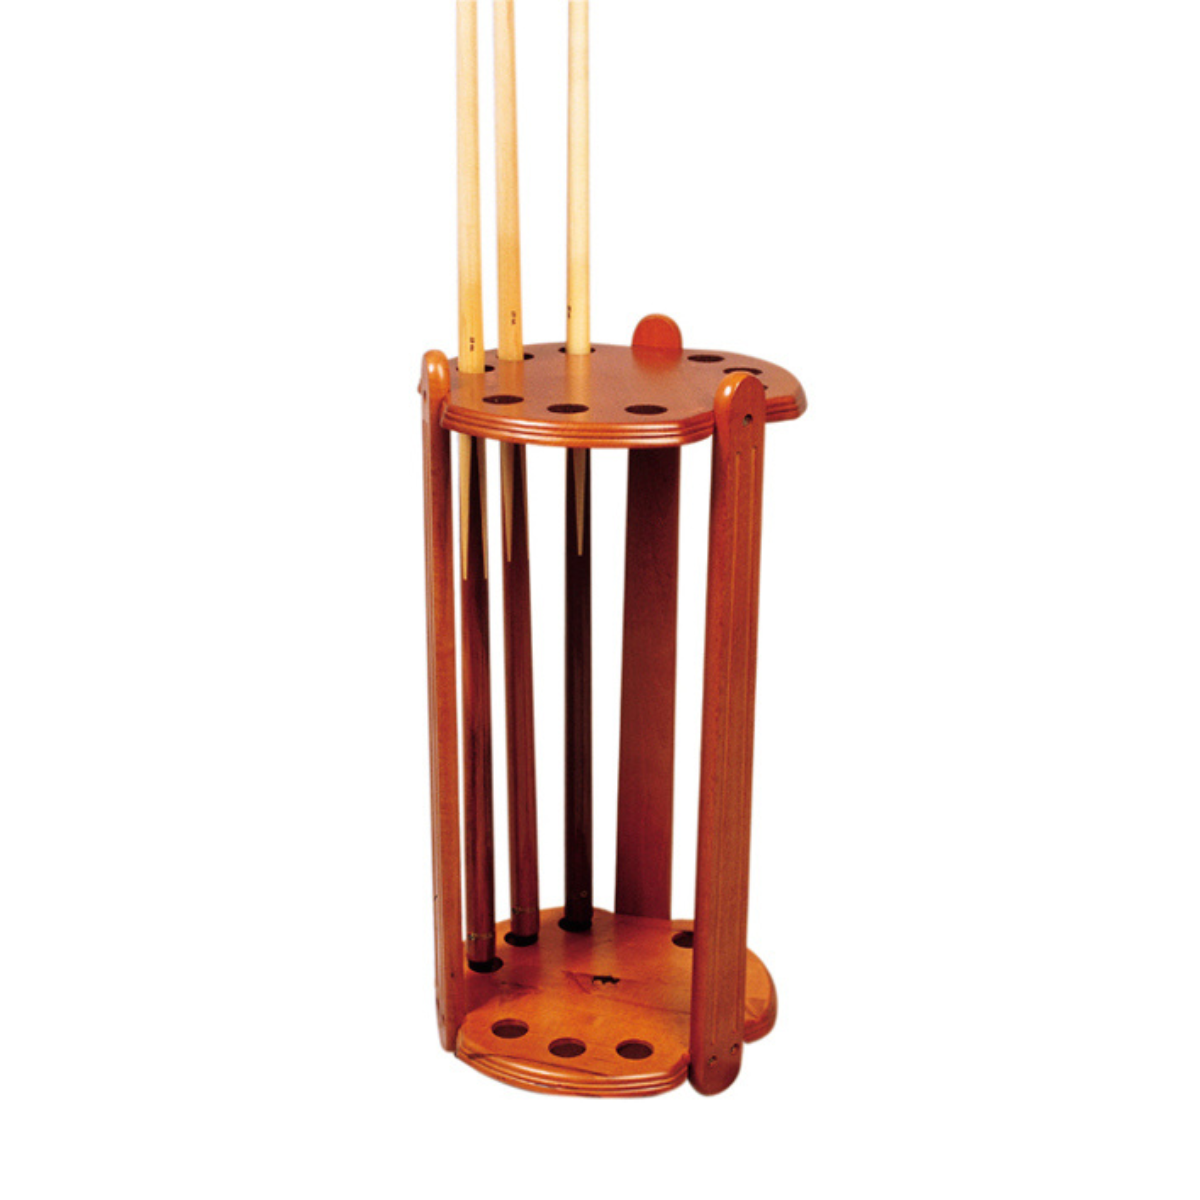 The Stand Around Pool & Snooker Cue Stand Maple